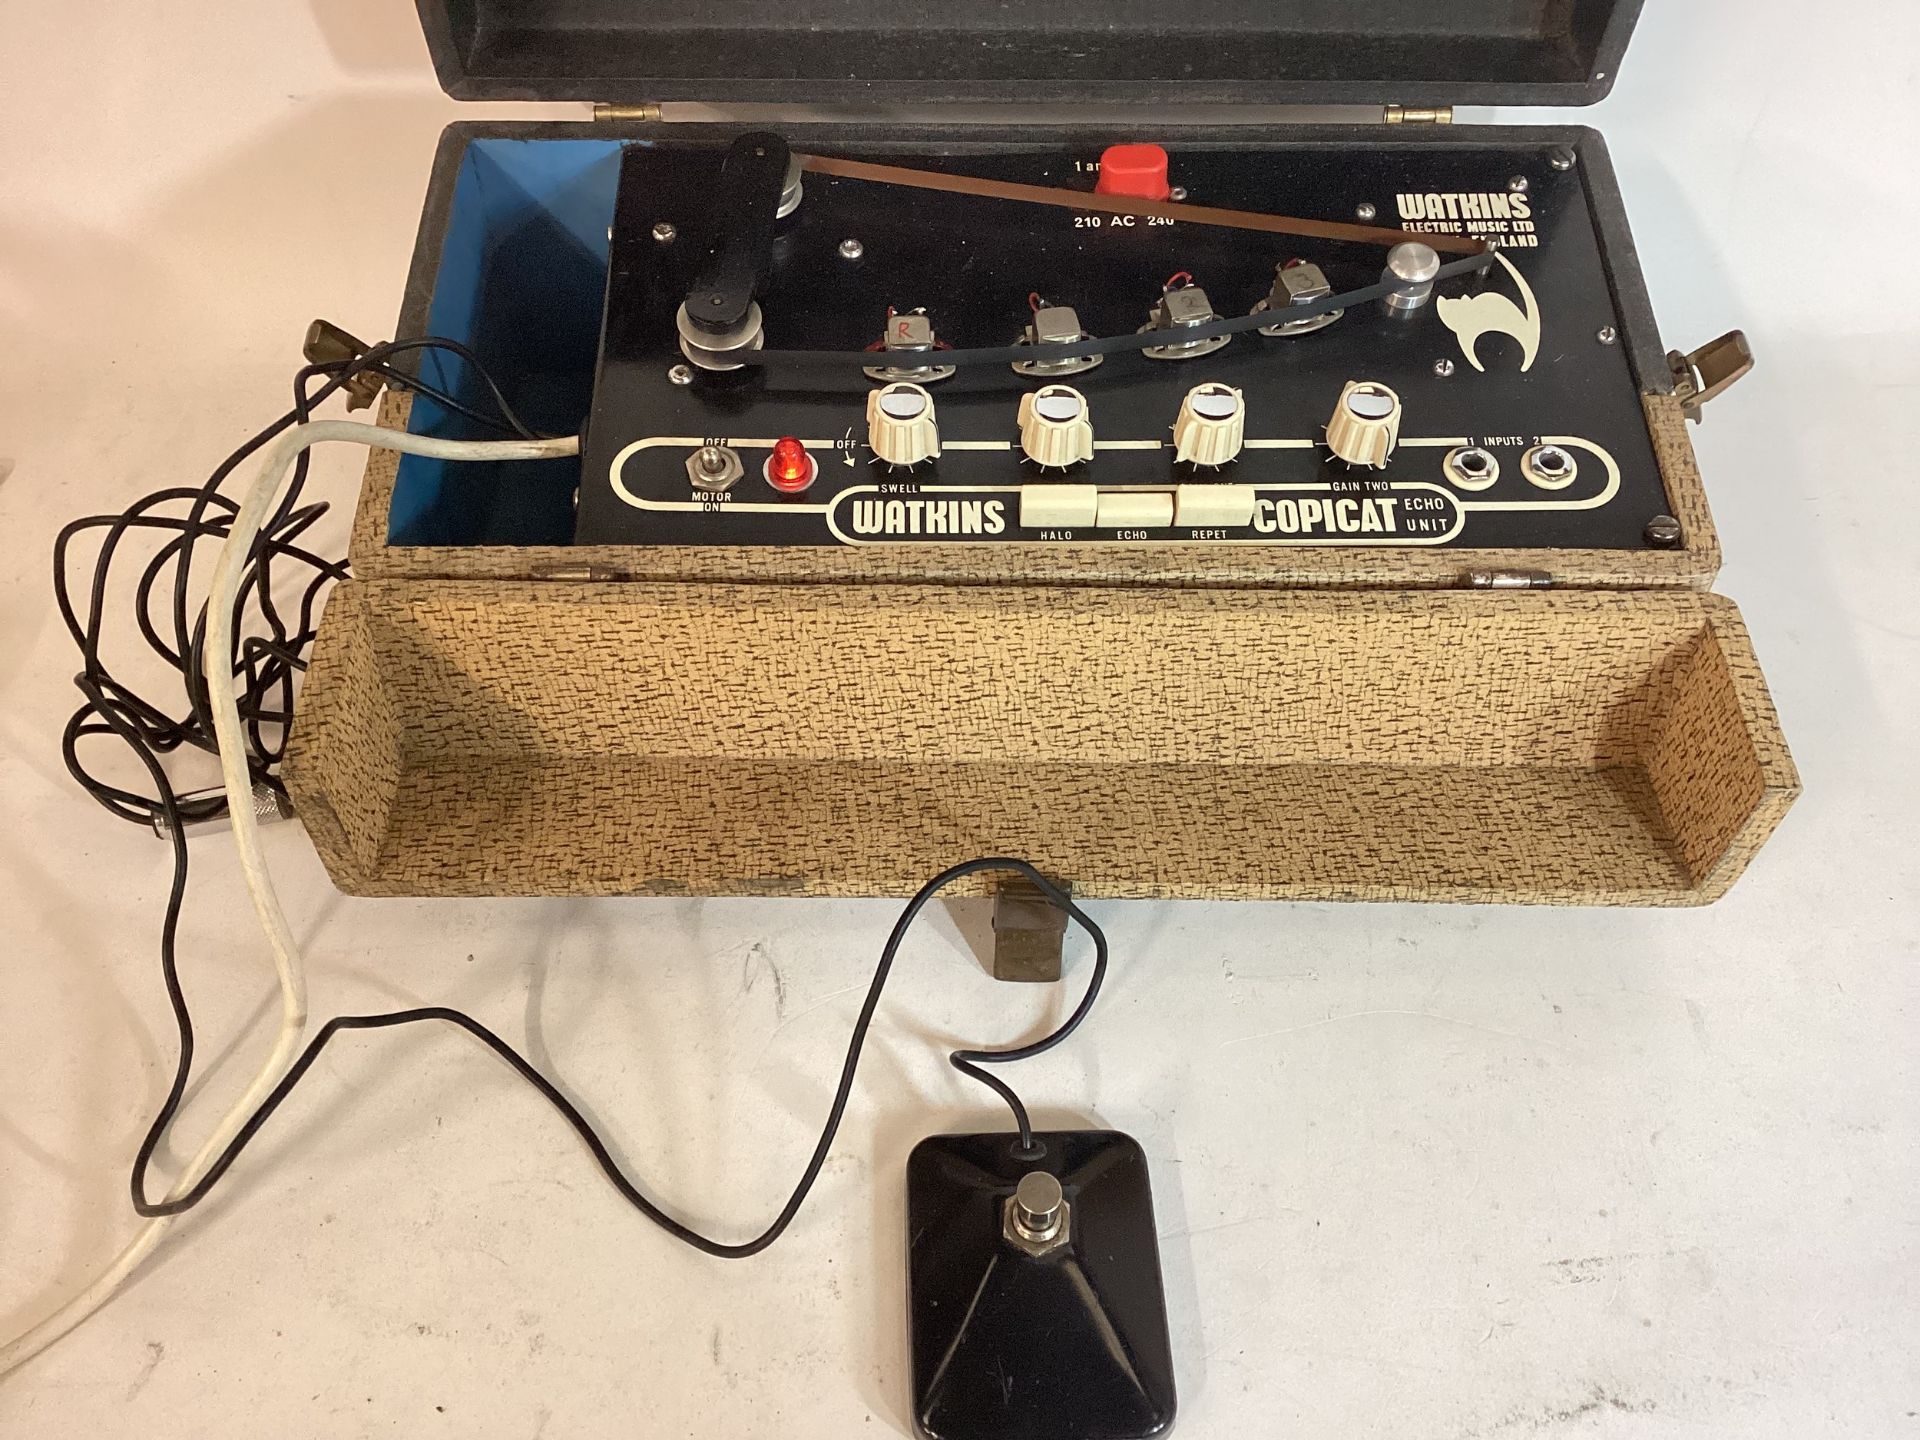 WATKINS / WEM COPICAT ECHO UNIT. The Copicat was the first independent tape loop echo unit to exist. - Image 3 of 6